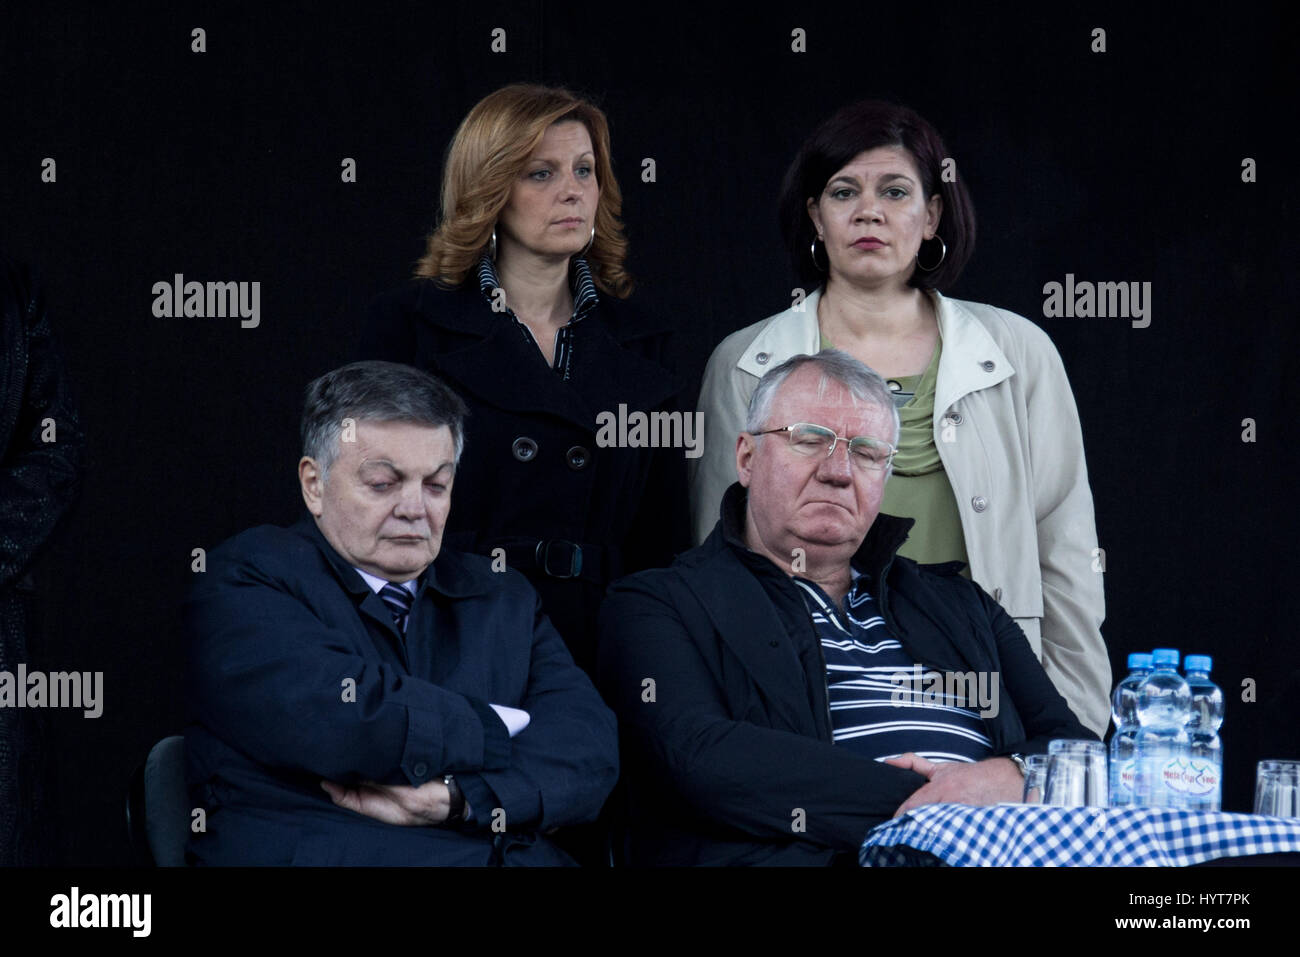 VRSAC, SERBIA - APRIl 10, 2016: Vojislav Seselj, leader of the Serbian Radial Party (SRS) sleeping during one of his meeting, next to one of his assoc Stock Photo